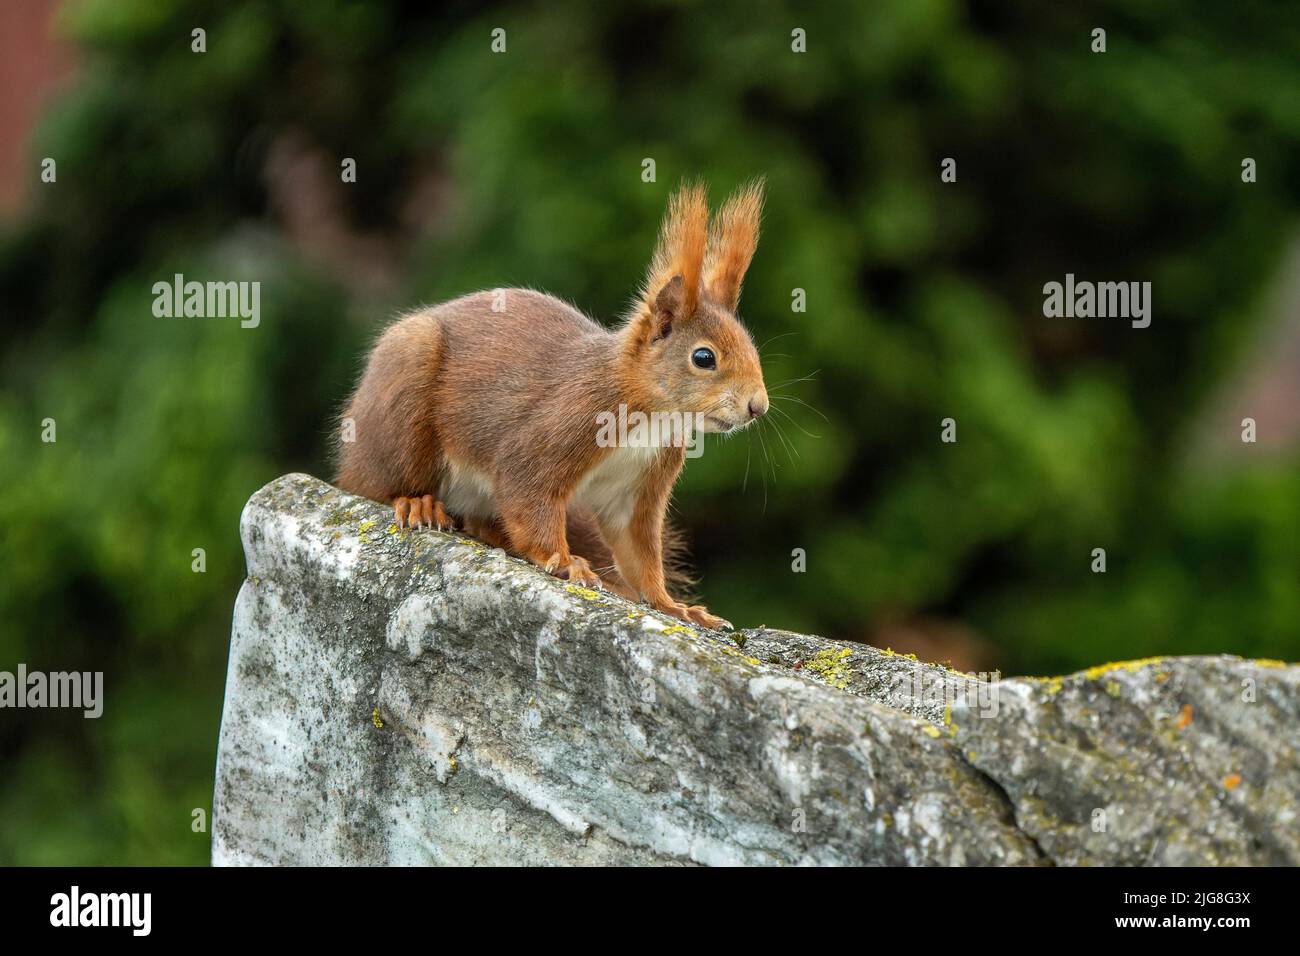 Squirrel sitting on a stone. Stock Photo